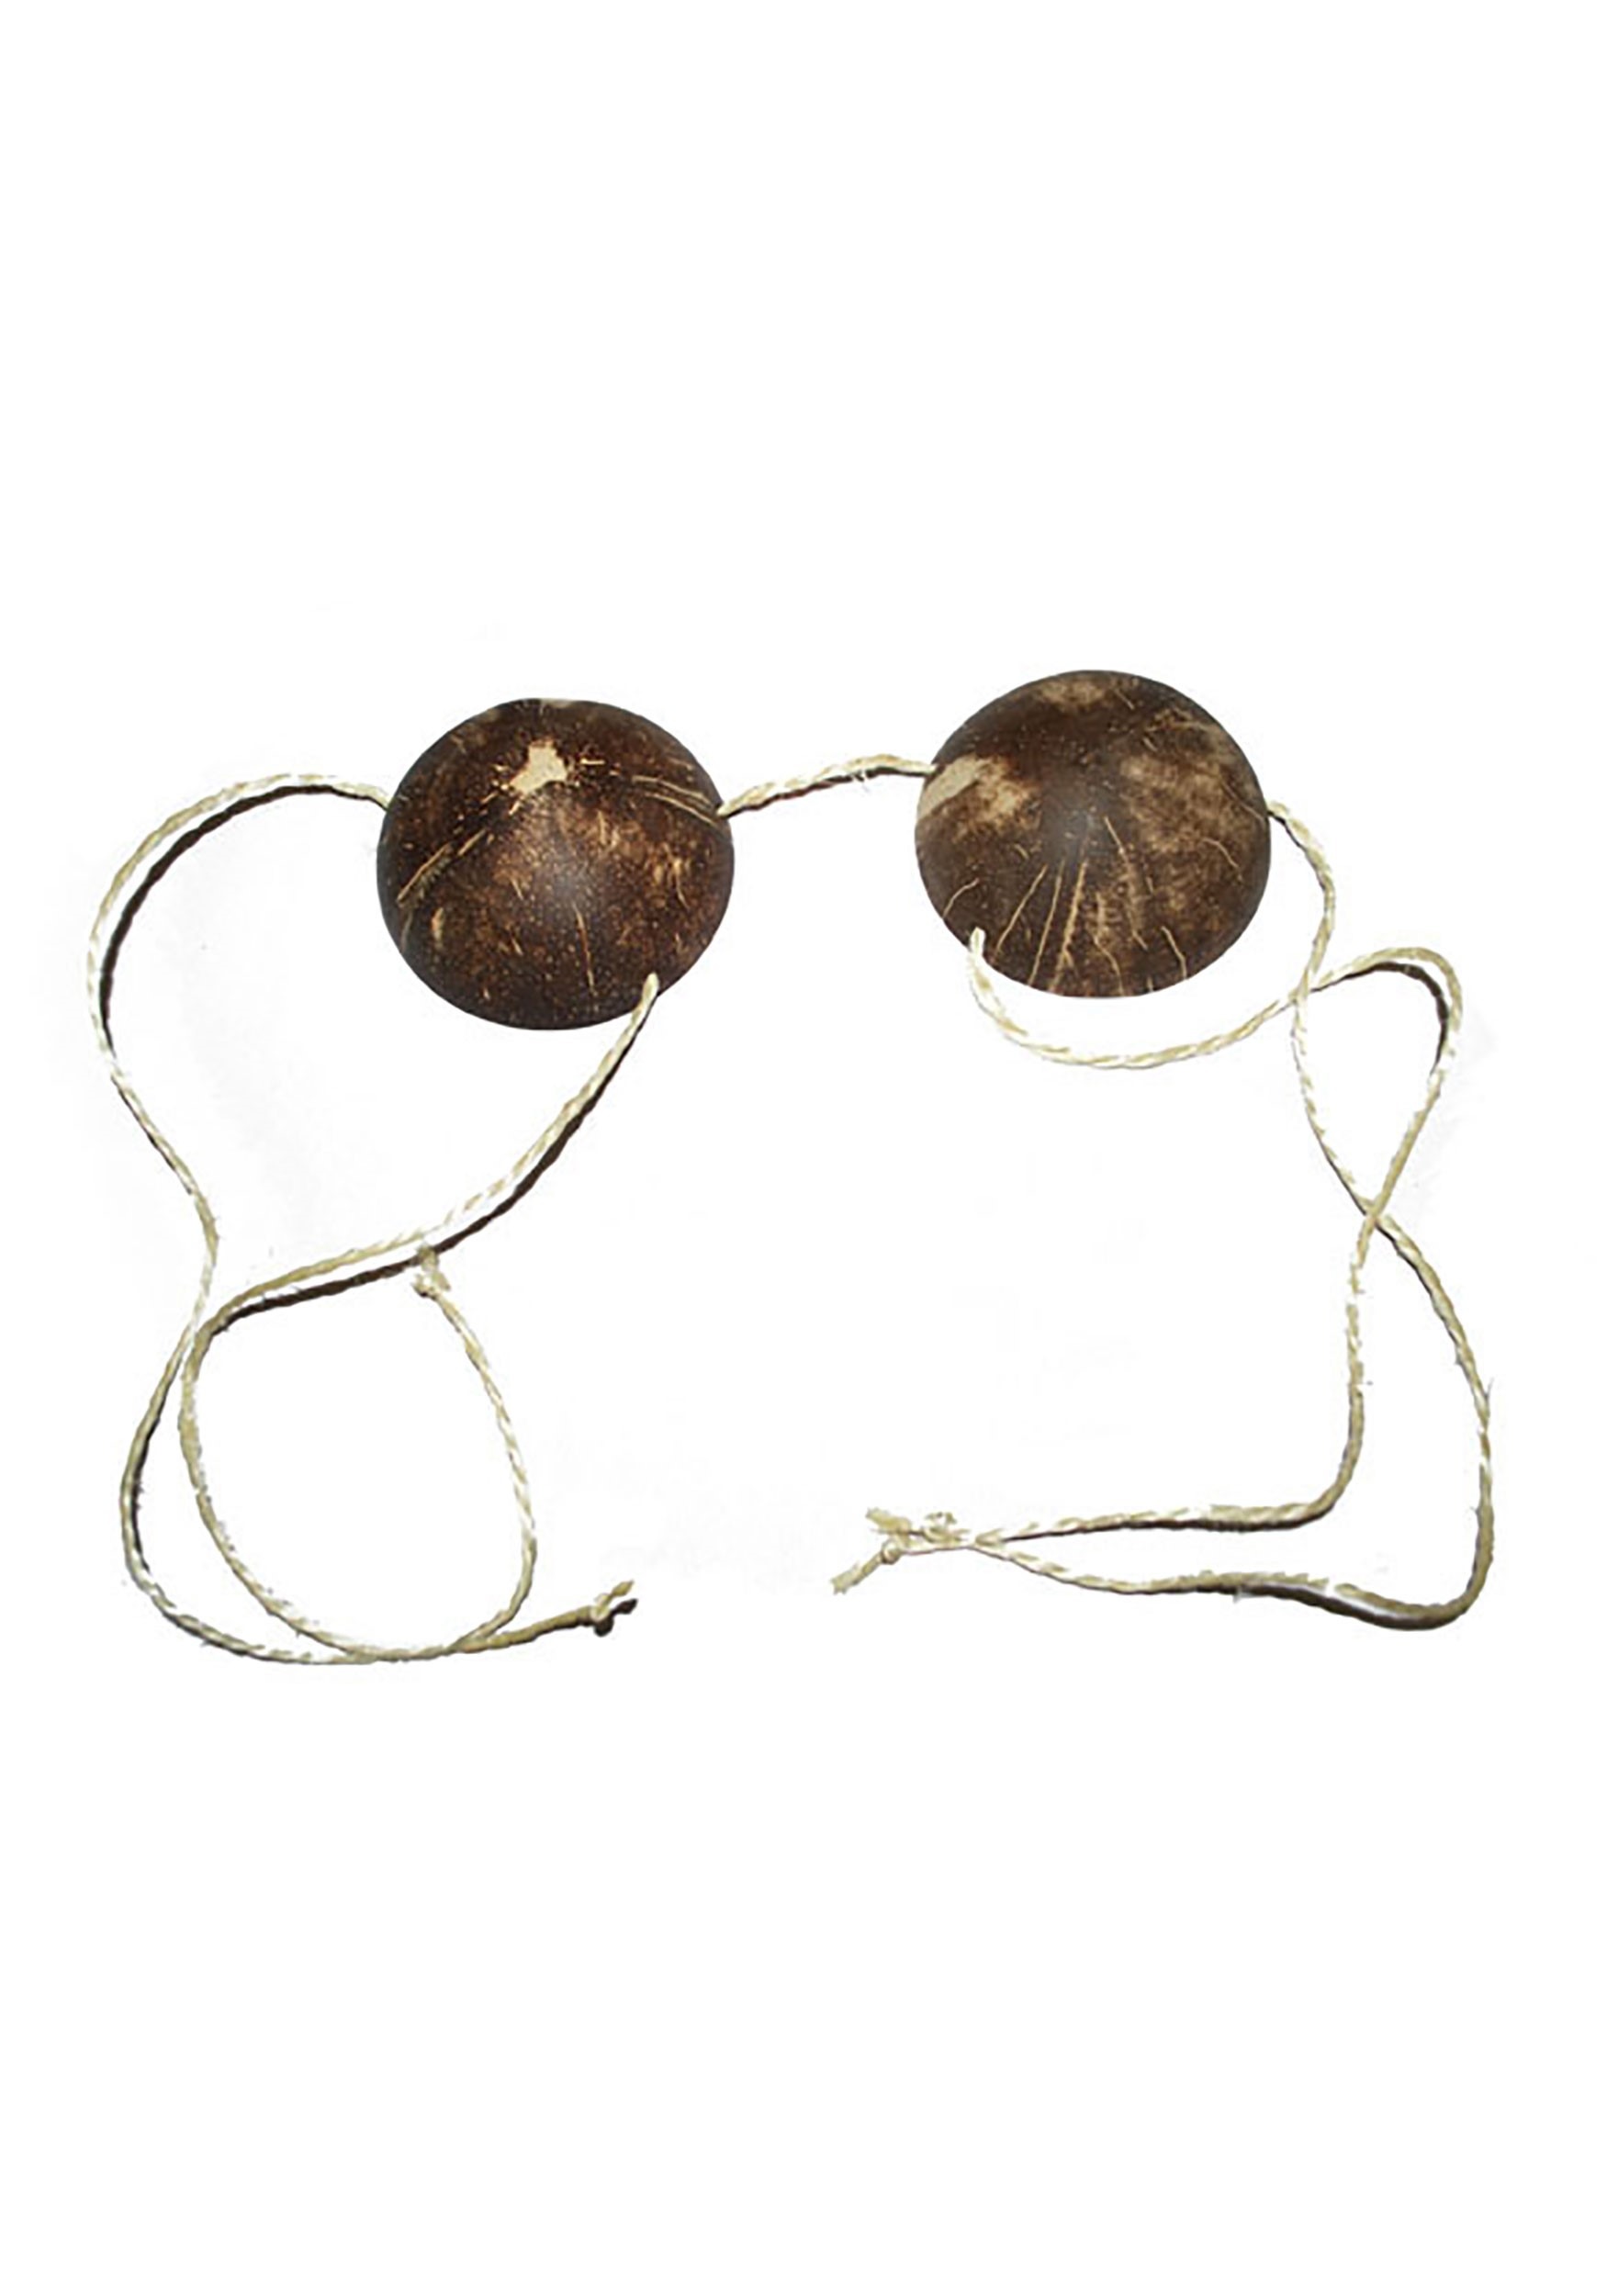 https://images.halloween.com/products/60034/1-1/real-coconut-bra.jpg